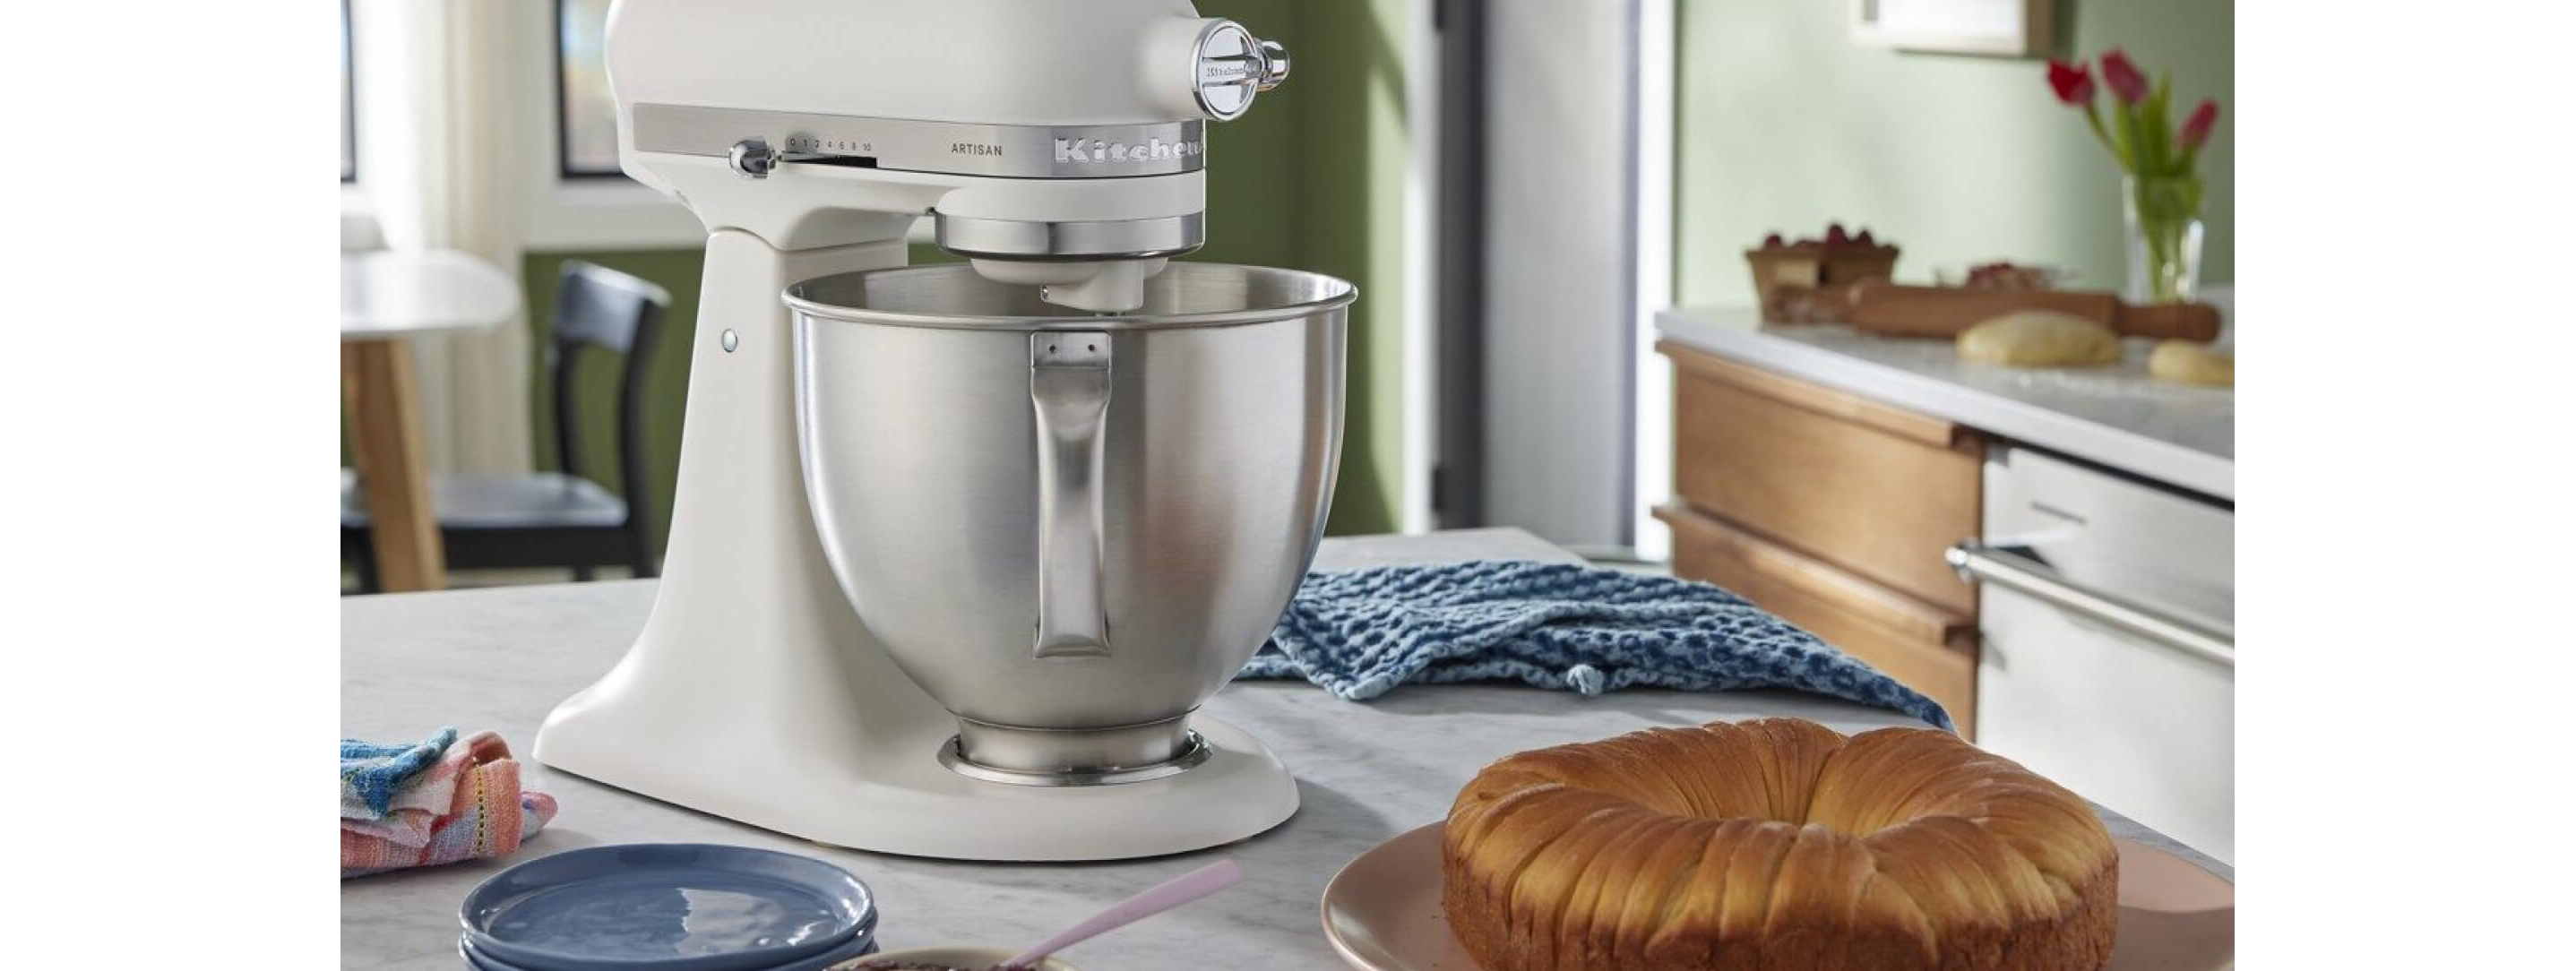 Katedral Komedieserie at straffe Kitchen Appliances to Bring Culinary Inspiration to Life | KitchenAid